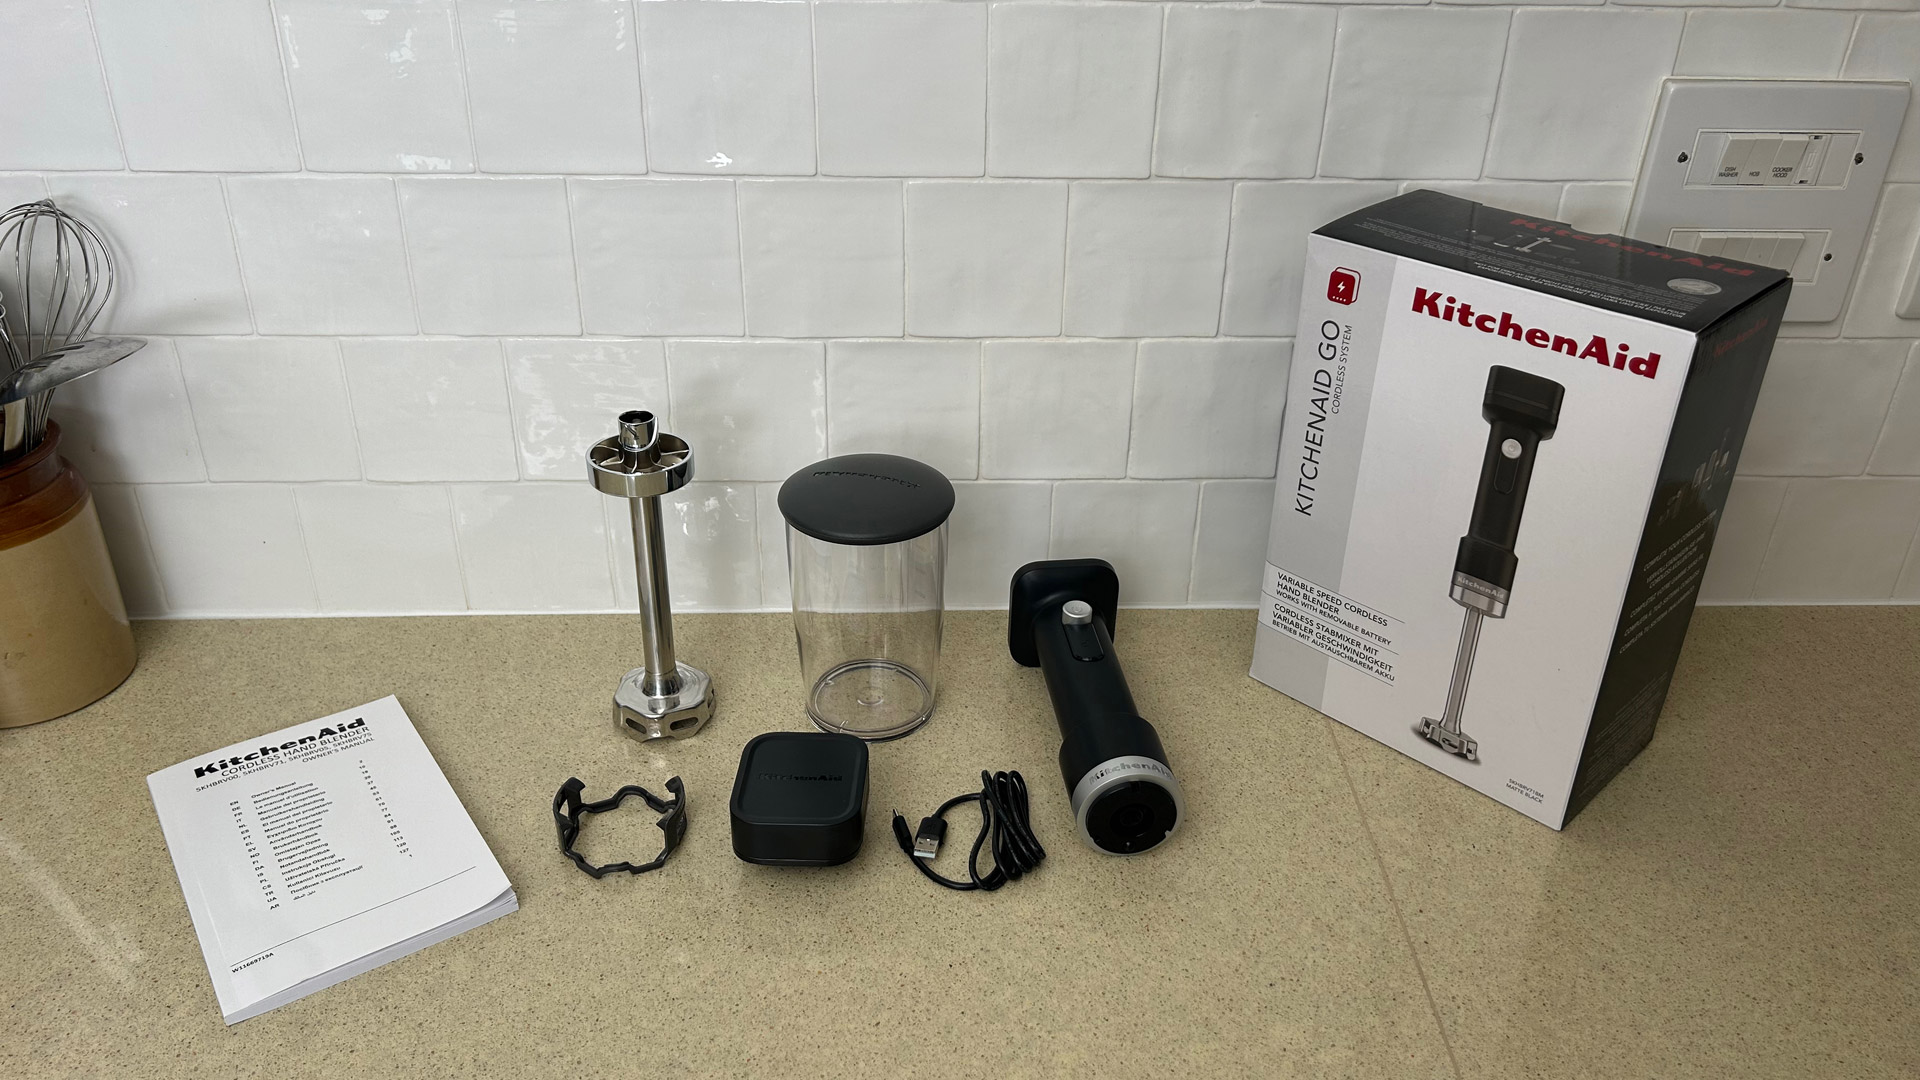 The KitchenAid Go Cordless Hand Blender with all its accessories